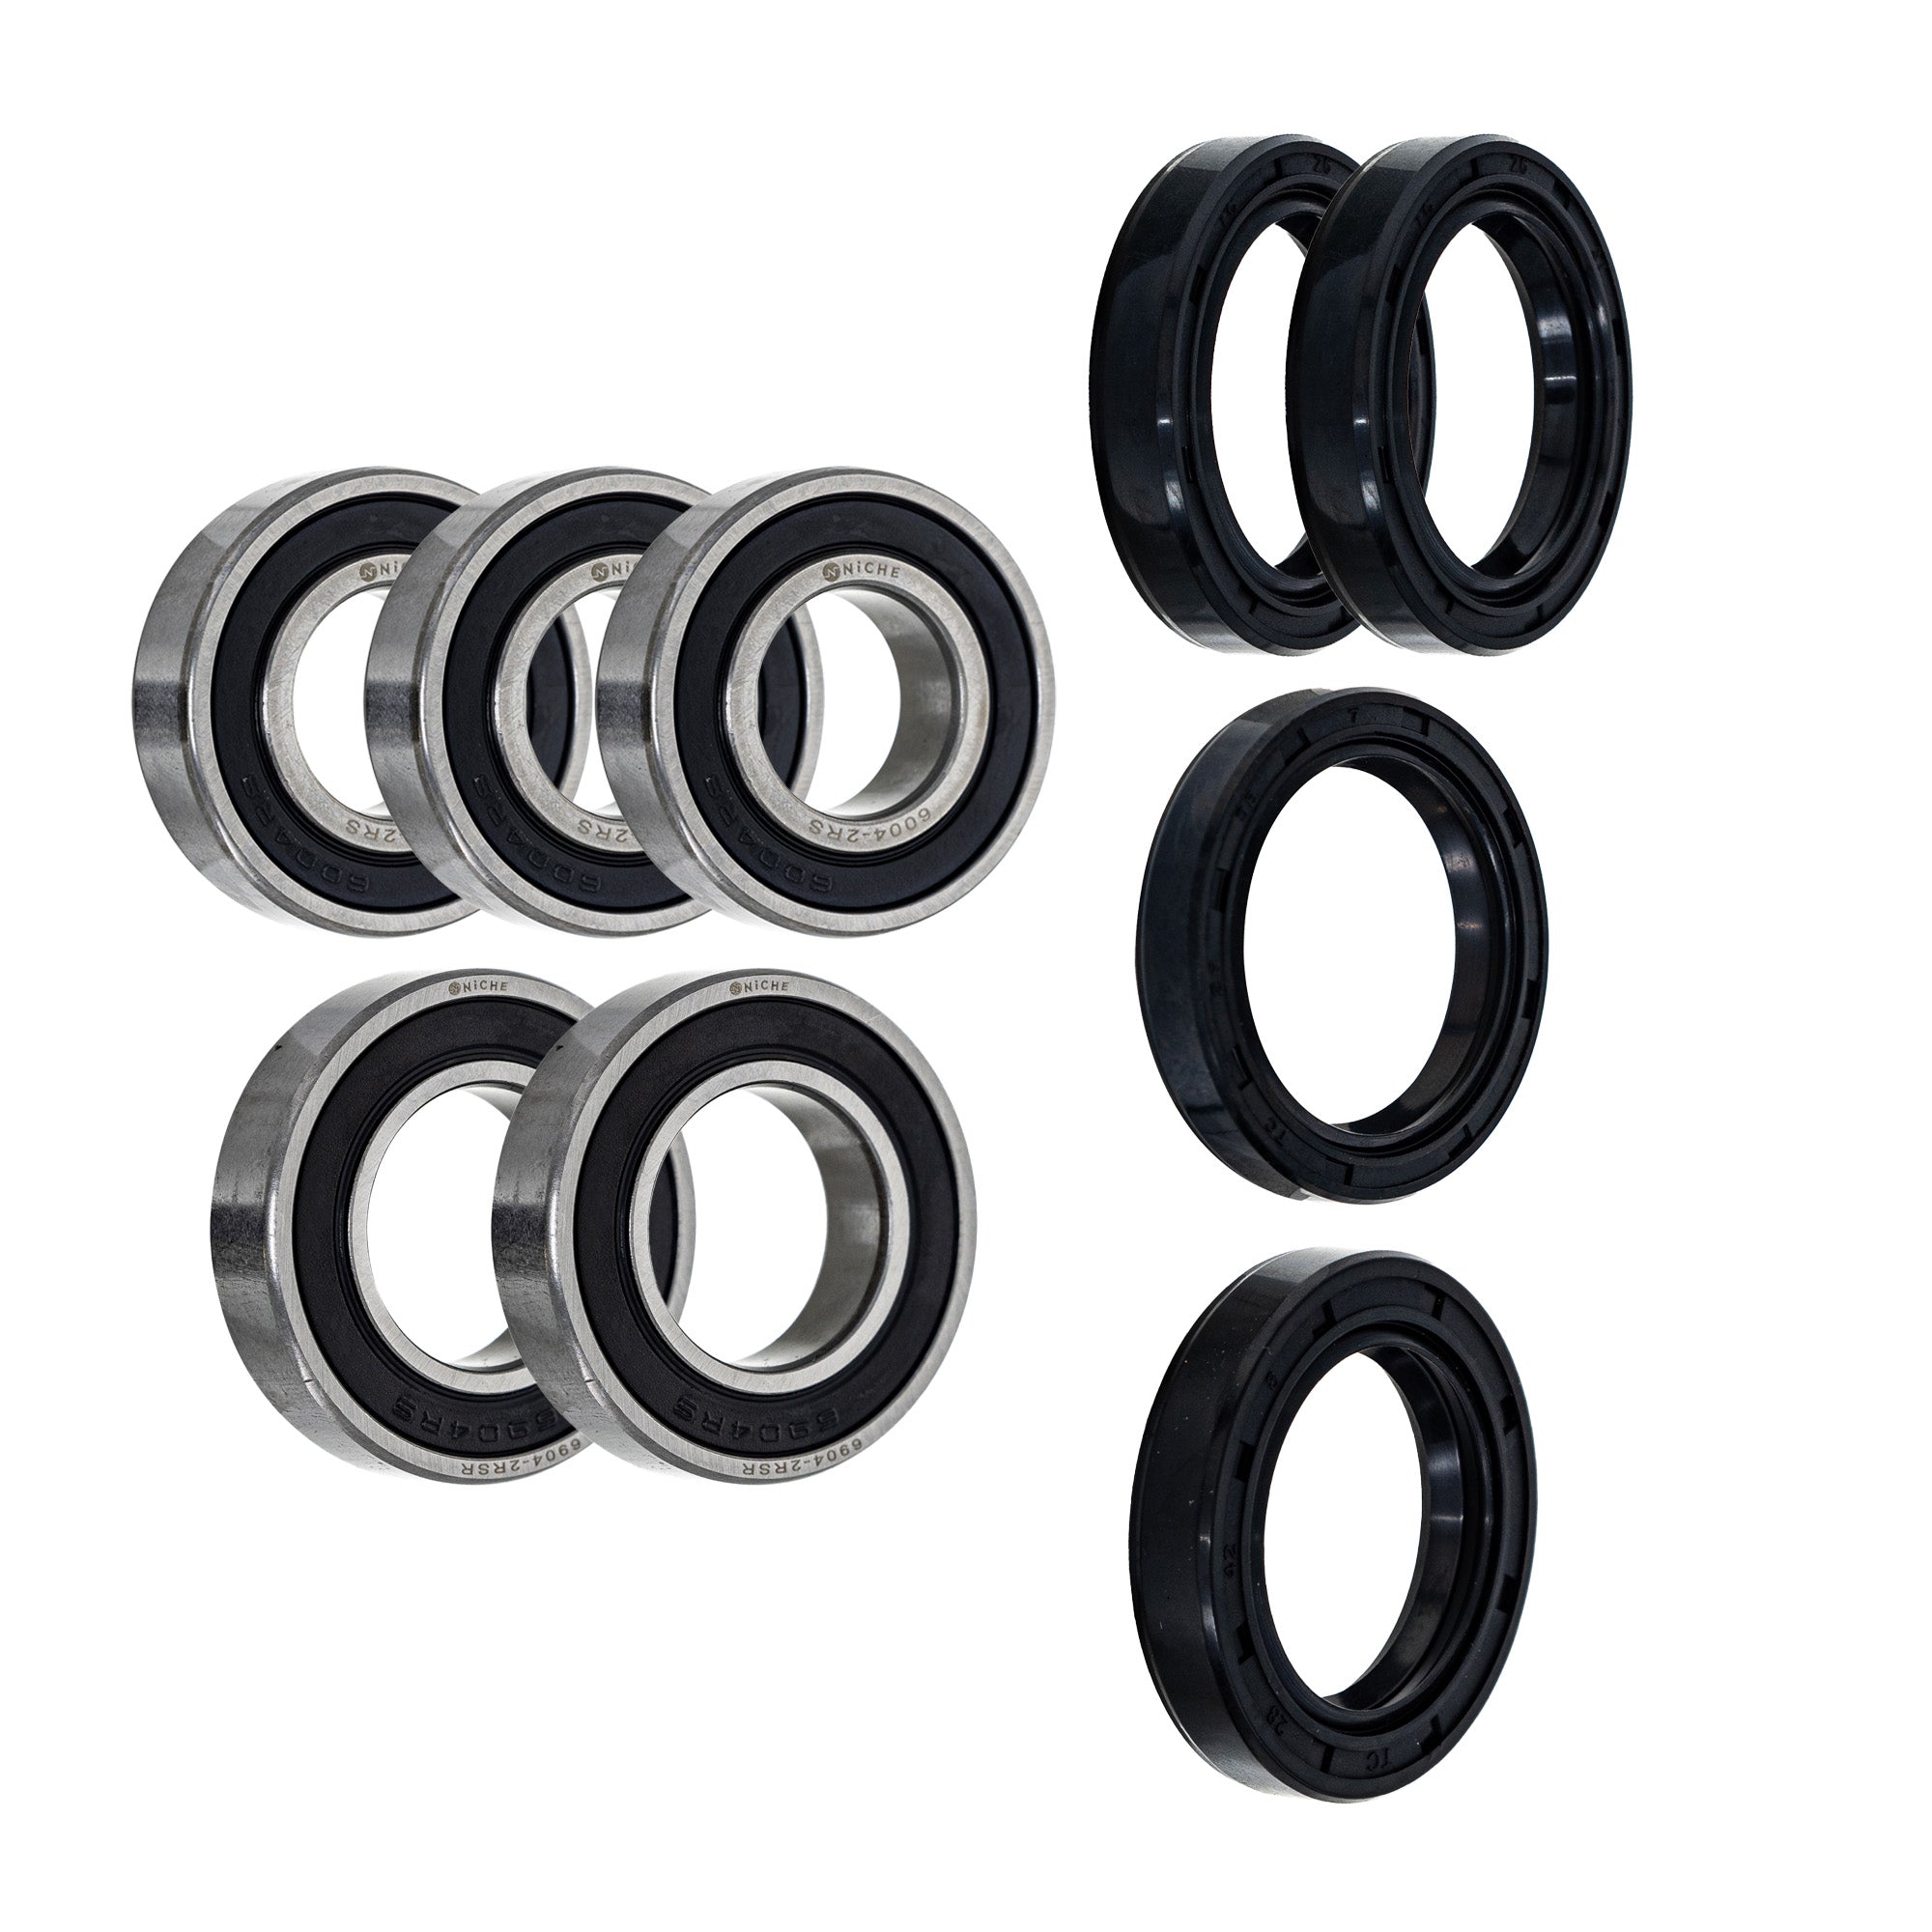 Wheel Bearing Seal Kit for zOTHER Ref No CR500R CR250R CR125R NICHE MK1008801